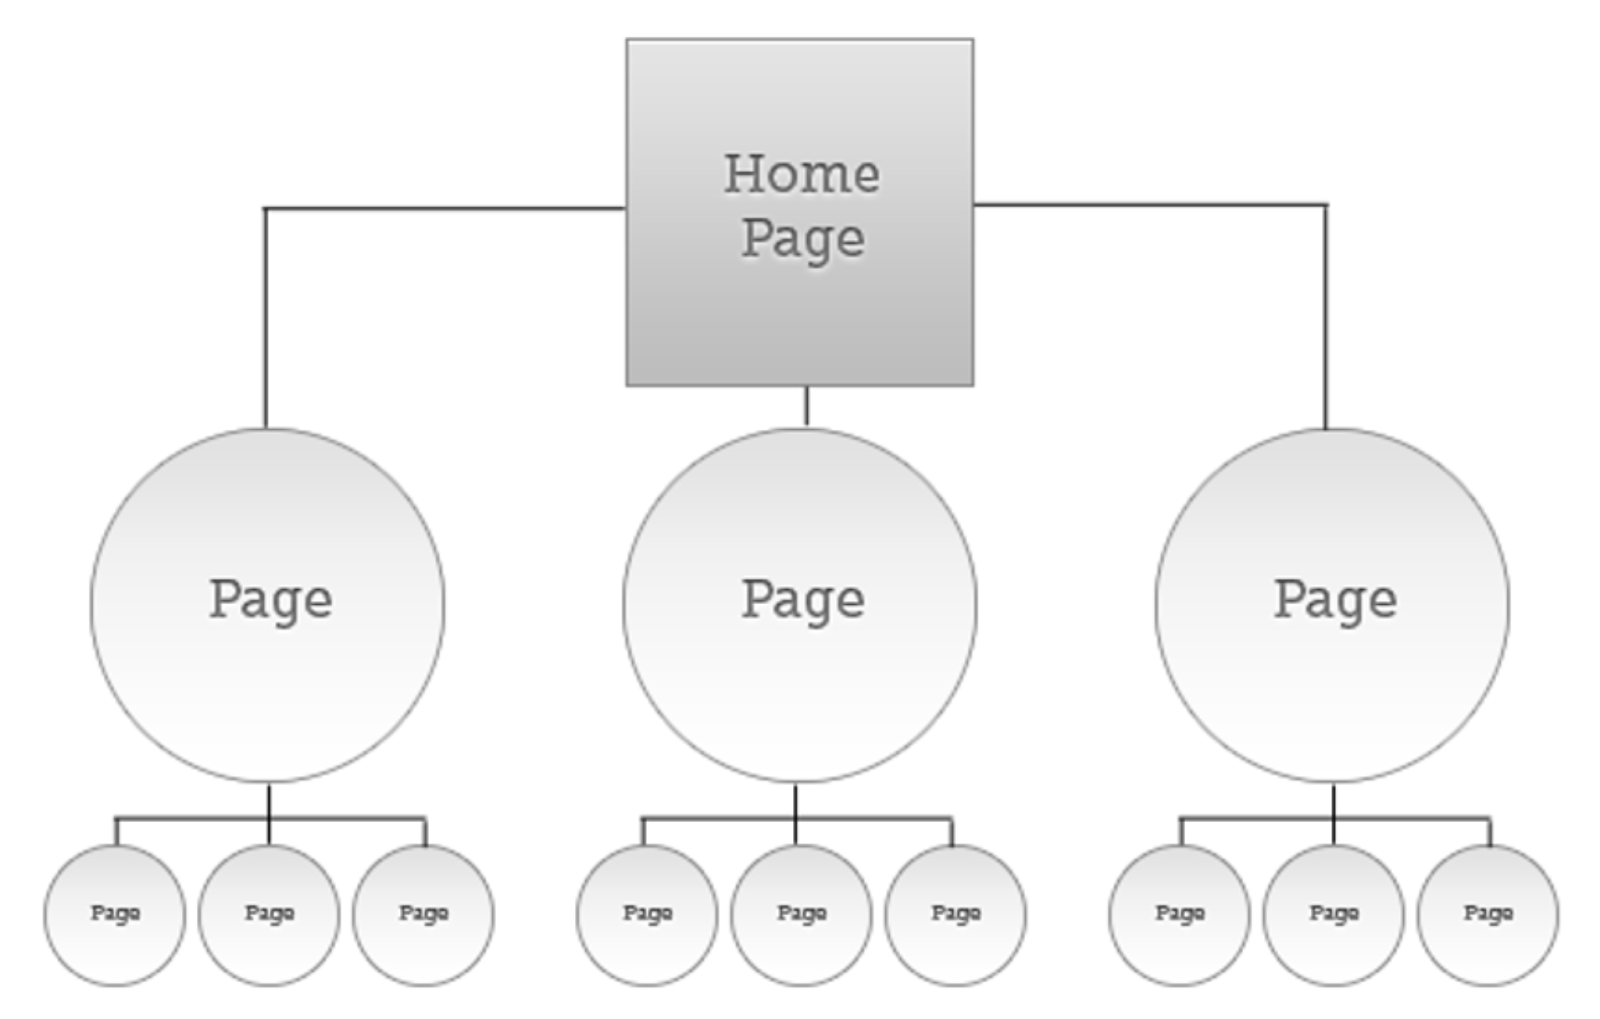 Image of a hierarchical model for content.